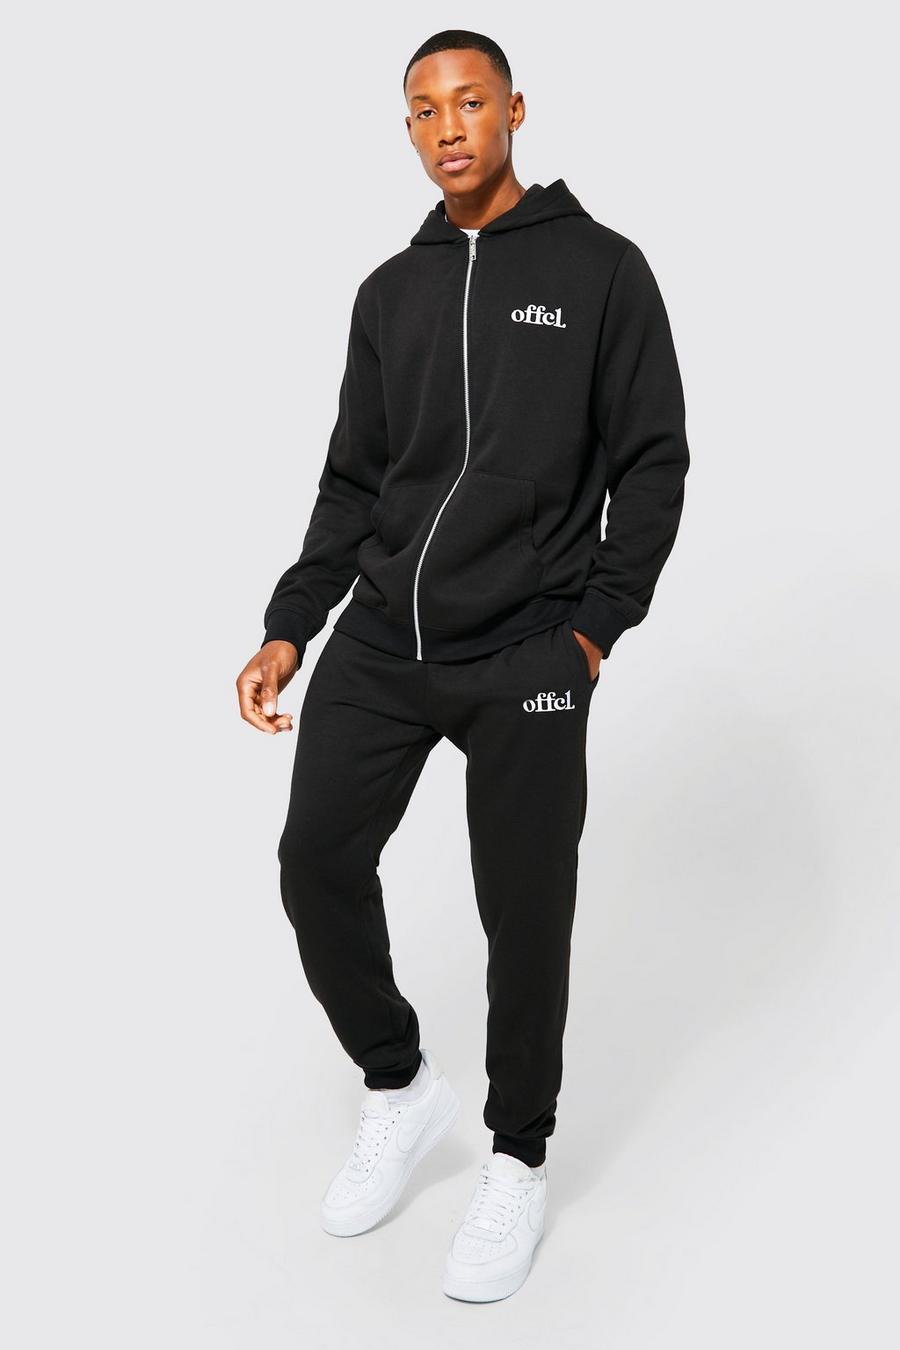 gym and workout clothes Tracksuits and sweat suits Boohoo Oversized Offcl Zip Funnel Neck Tracksuit Womens Mens Clothing Mens Activewear 